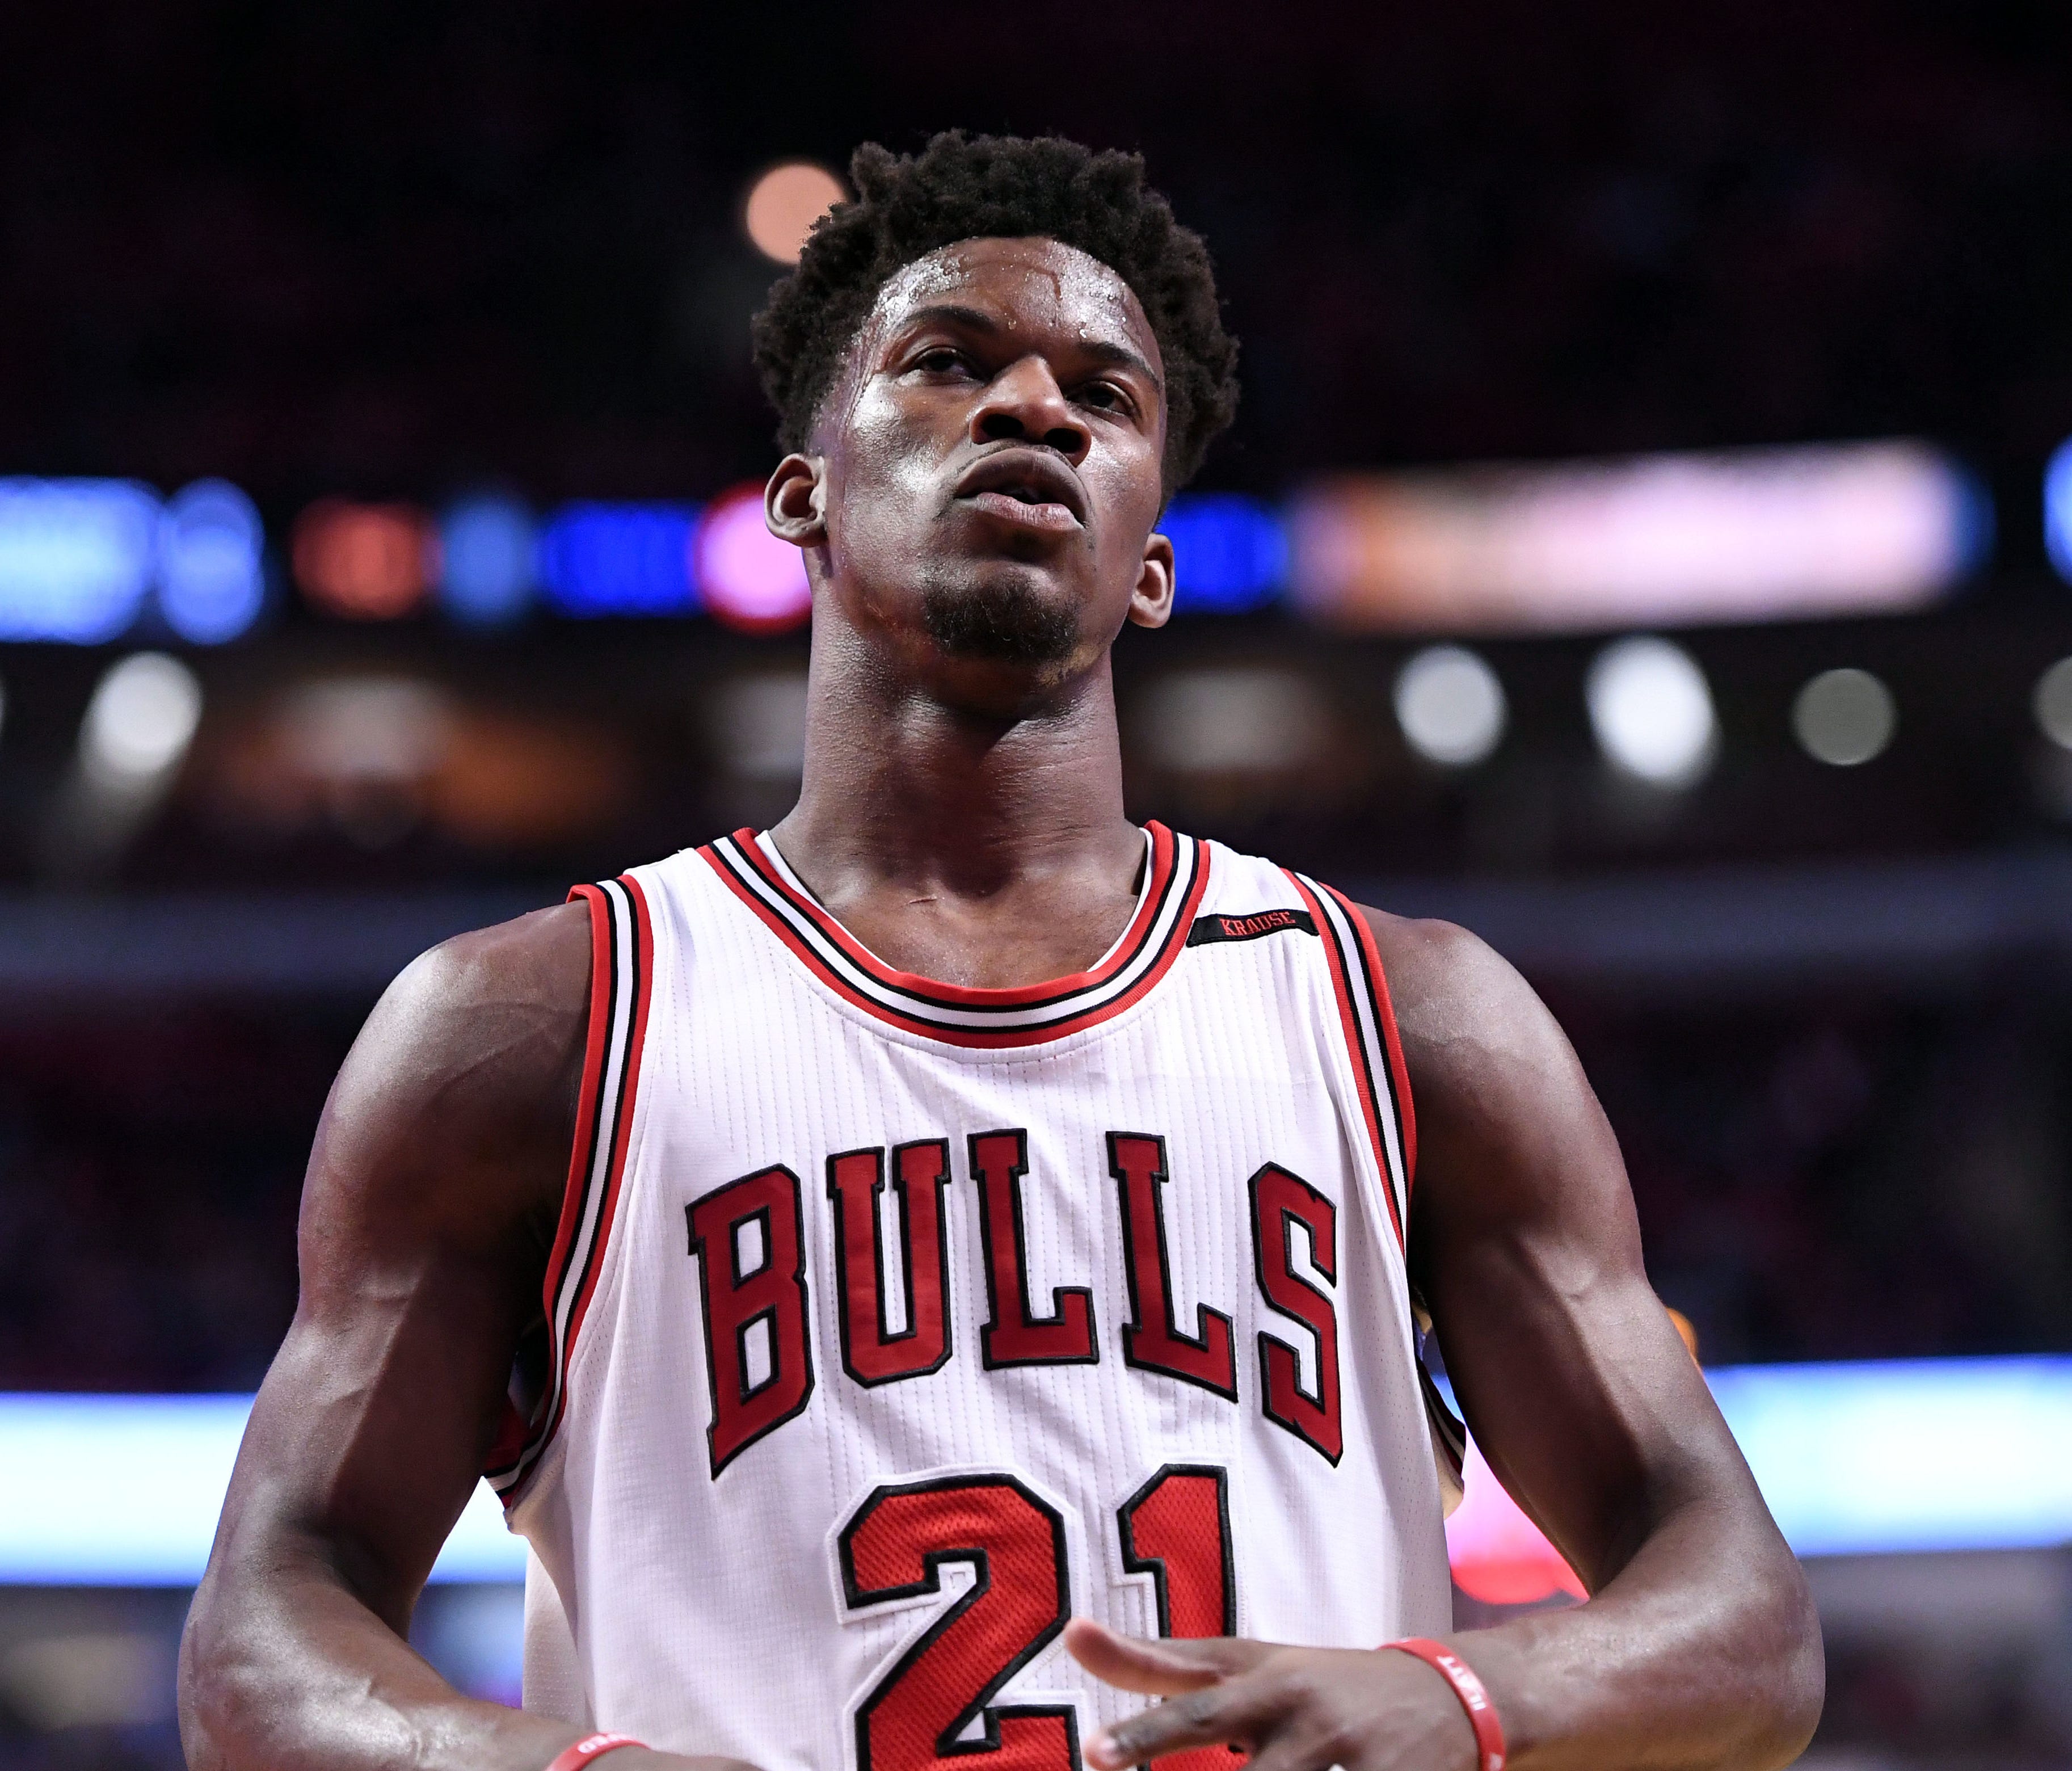 Chicago Bulls forward Jimmy Butler told Jimmy Kimmel that he loves Chicago and doesn't want to leave.